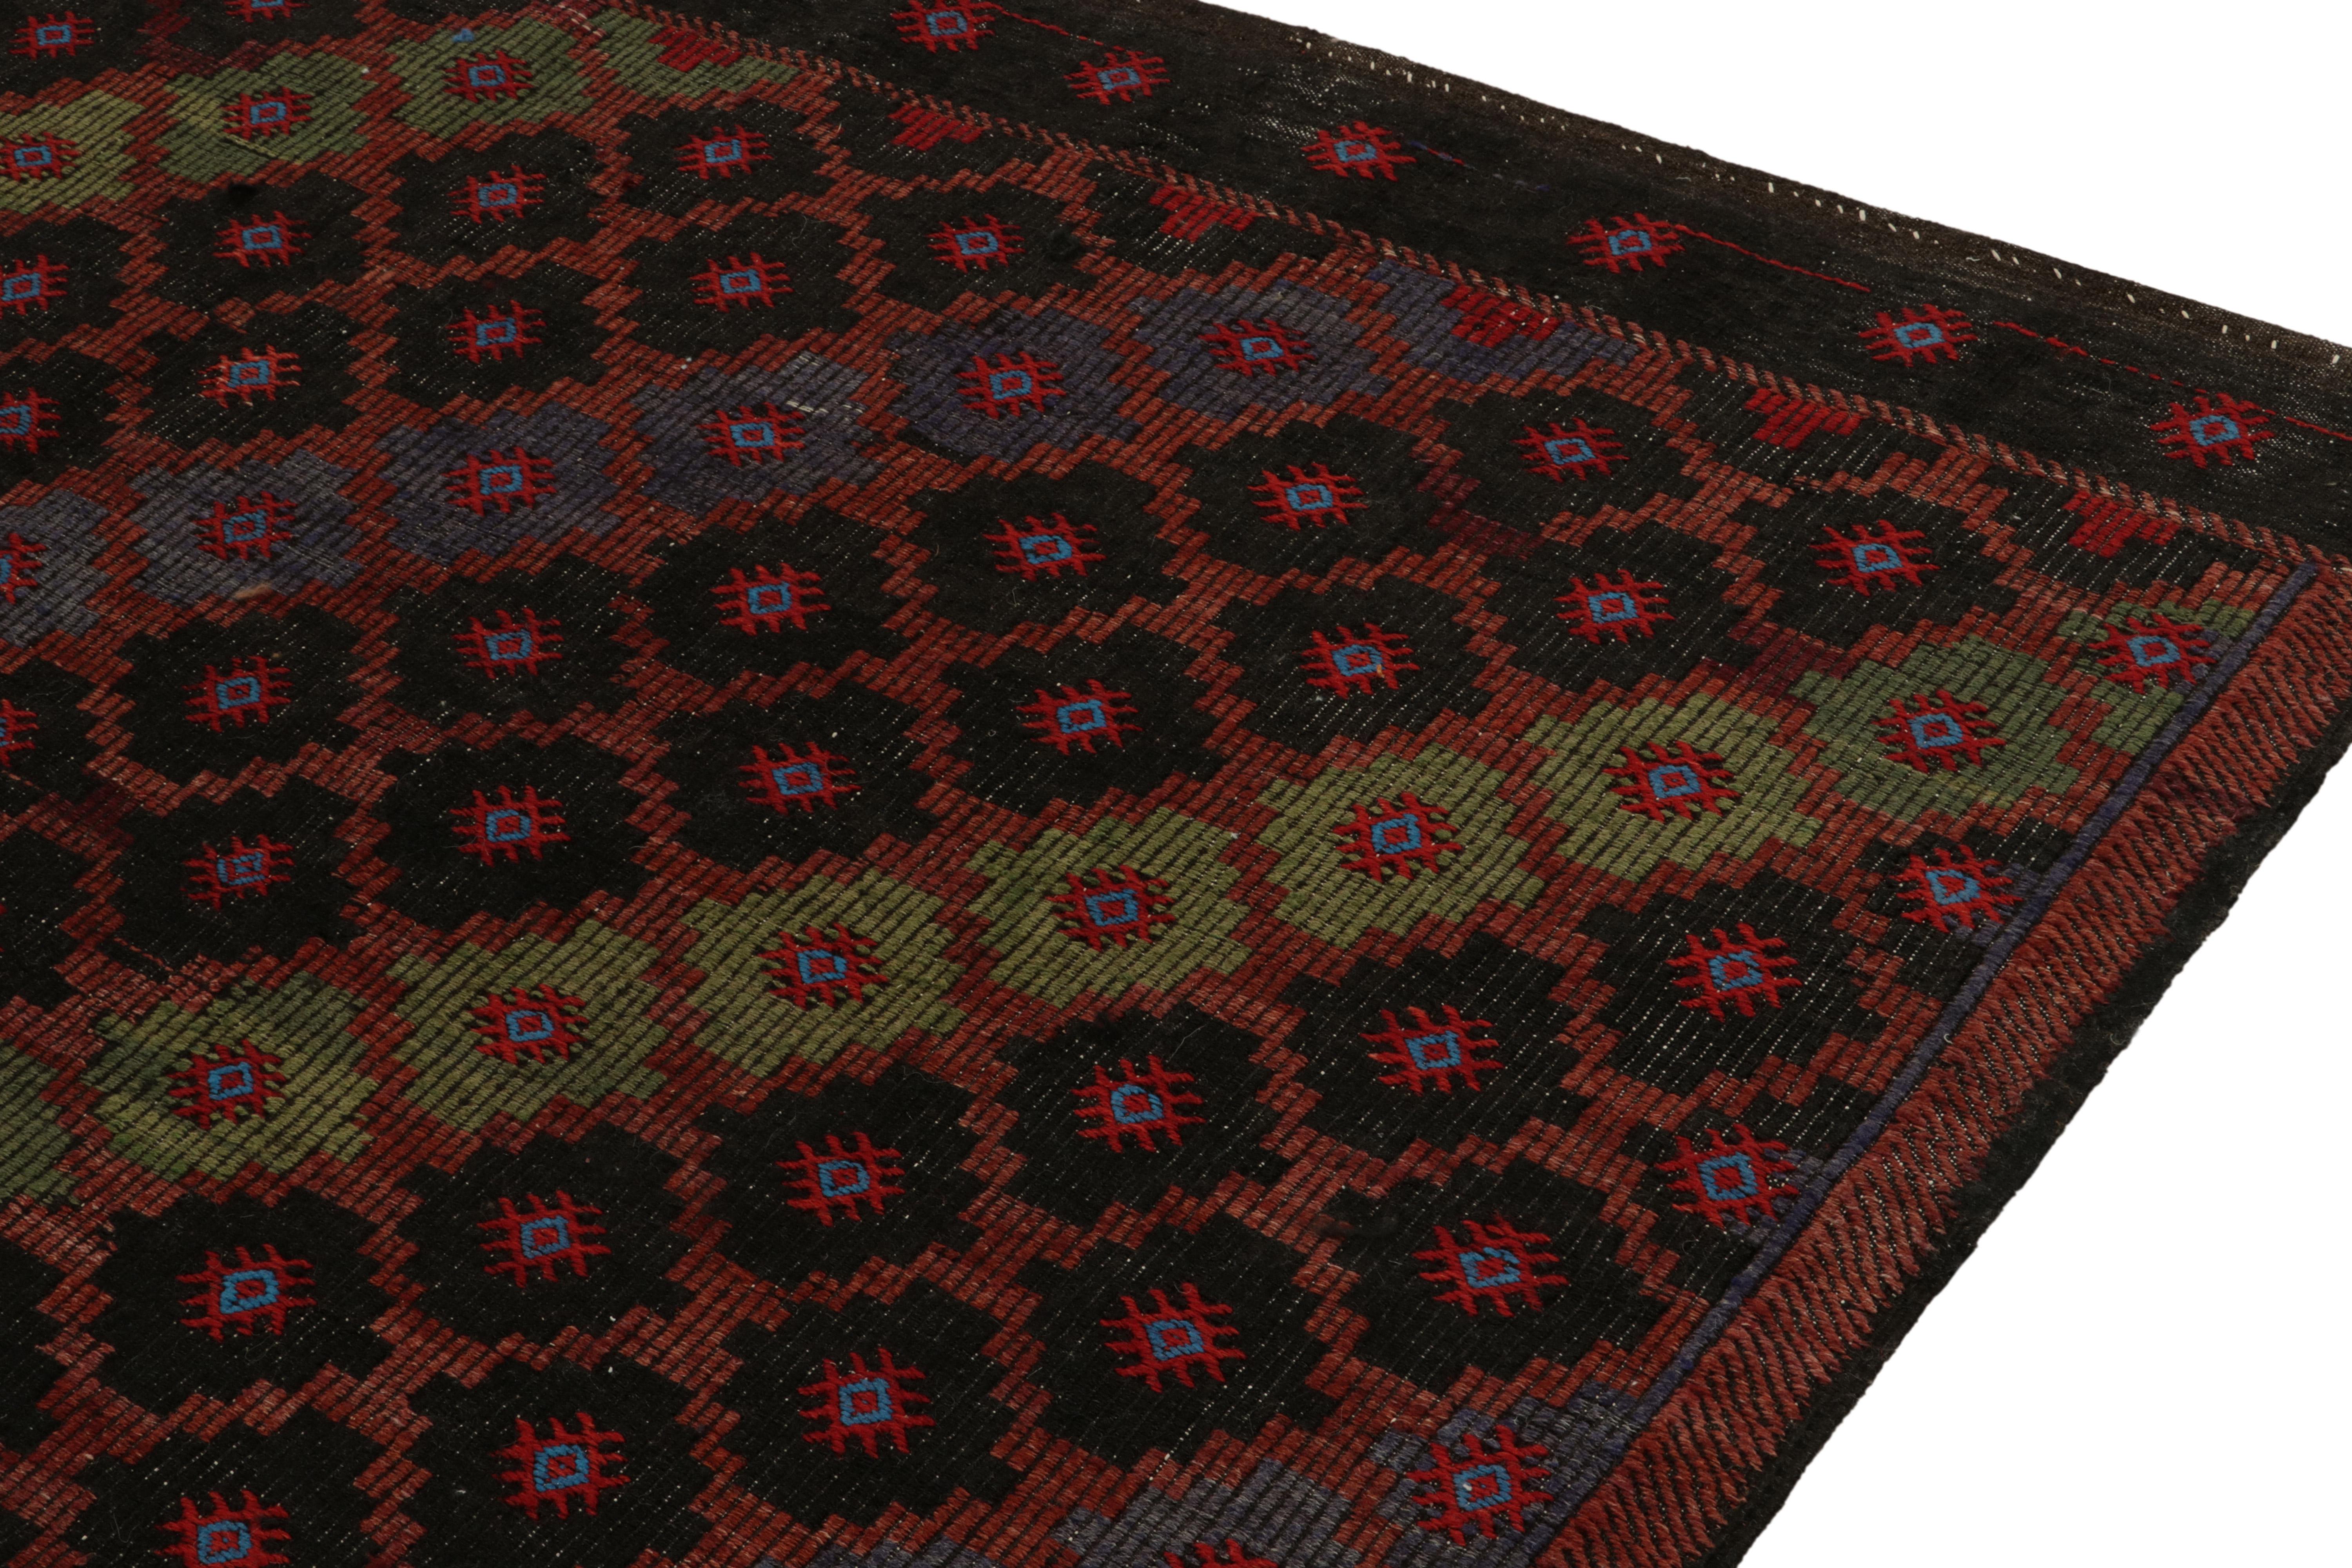 Vintage Cecim Tribal Kilim in Black and Red Geometric Patterns by Rug & Kilim In Good Condition For Sale In Long Island City, NY